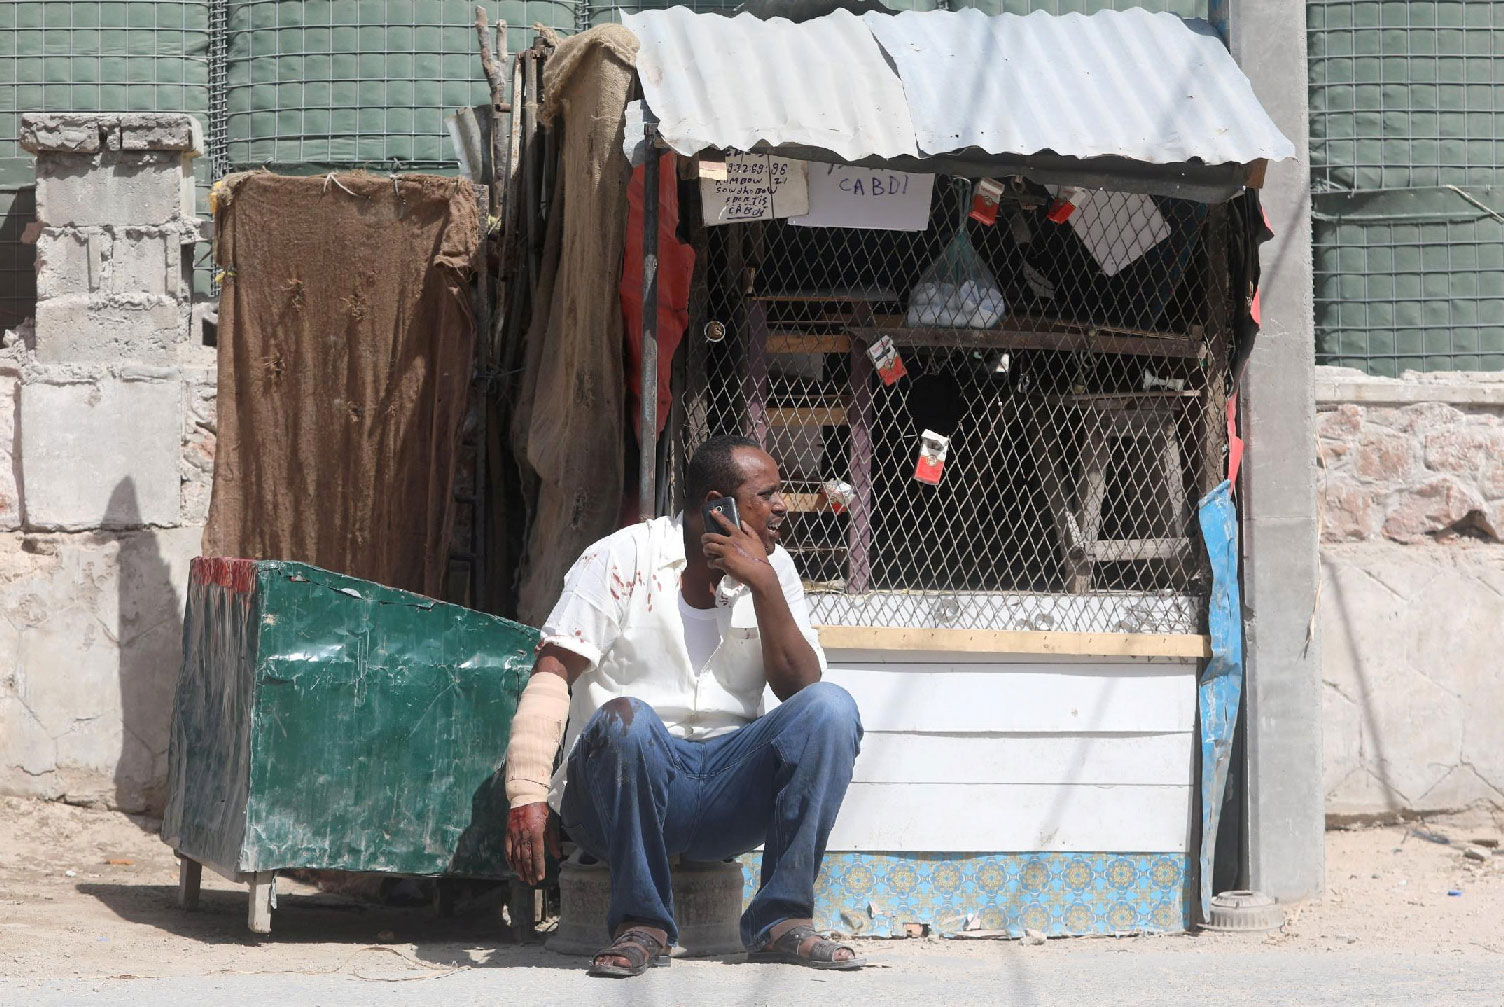 A civilian, injured following an explosion near the president's residence, uses his mobile phone as he waits for medical attention in Mogadishu, Somalia December 22, 2018.